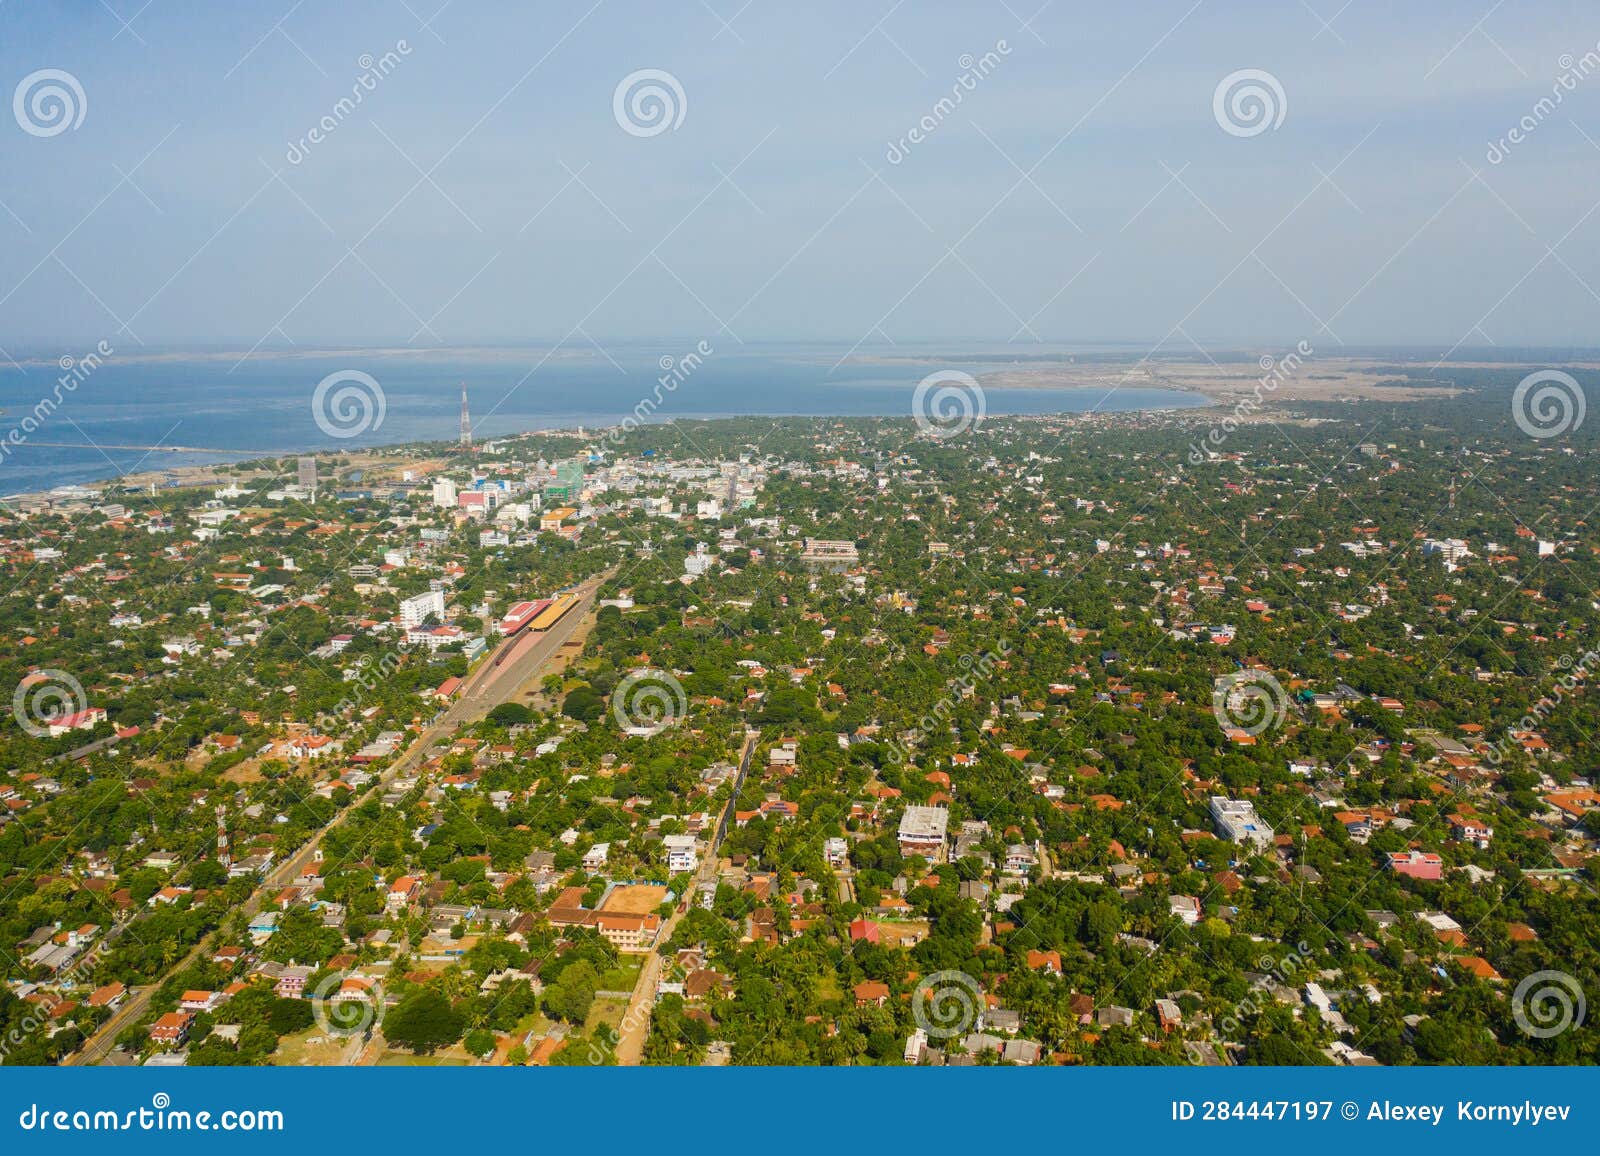 Aerial View Of The City Of Jaffna Sri Lanka Stock Image Image Of